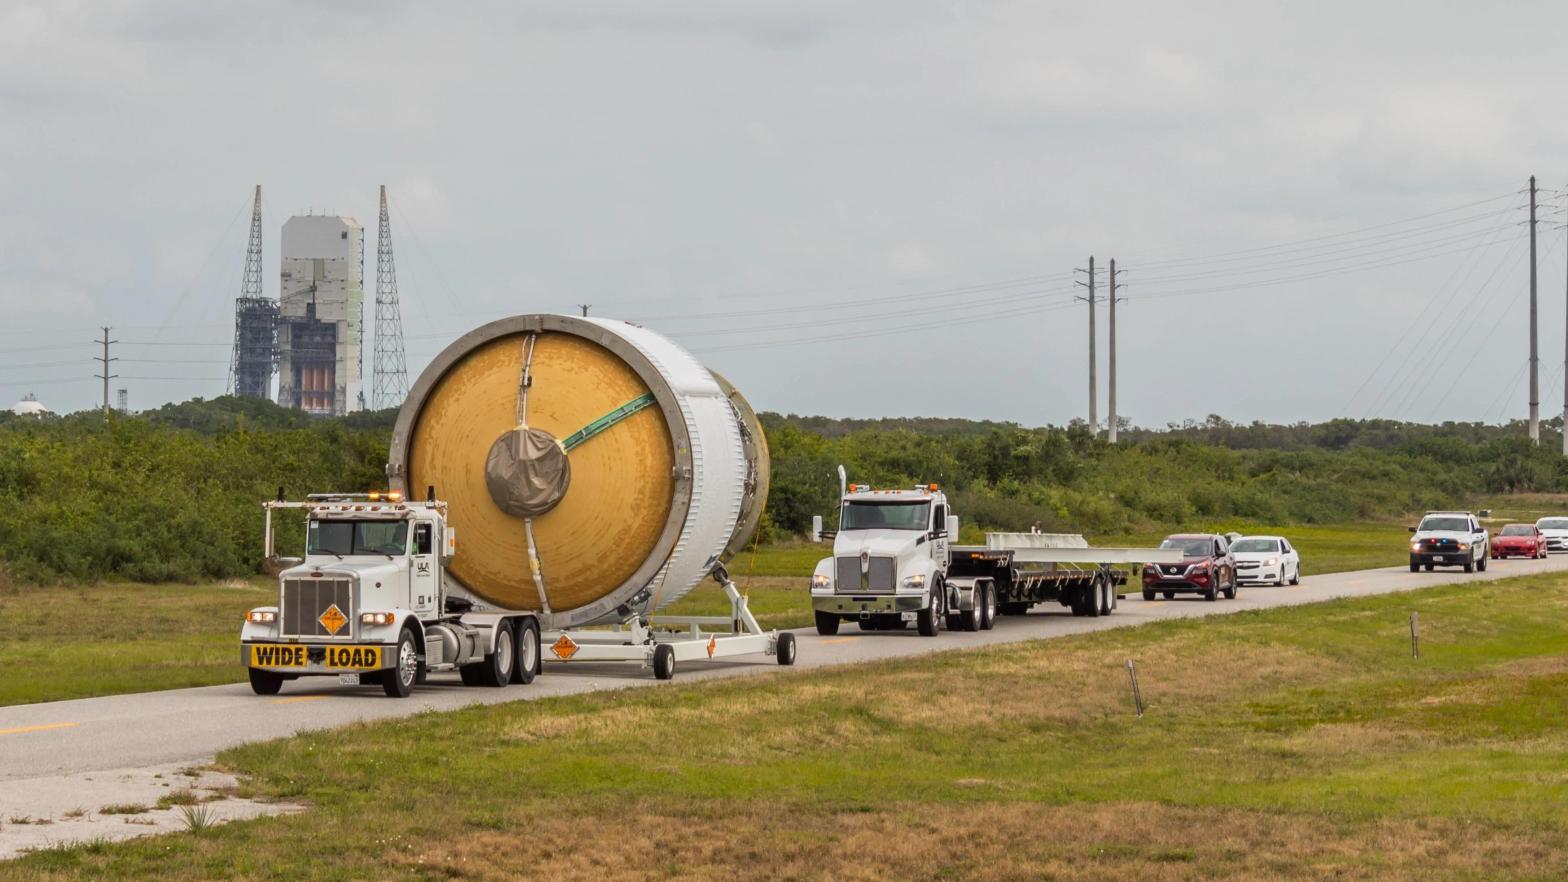 ICPS-2 being transported to the Delta Operations Centre at Cape Canaveral for processing. (Photo: United Launch Alliance)